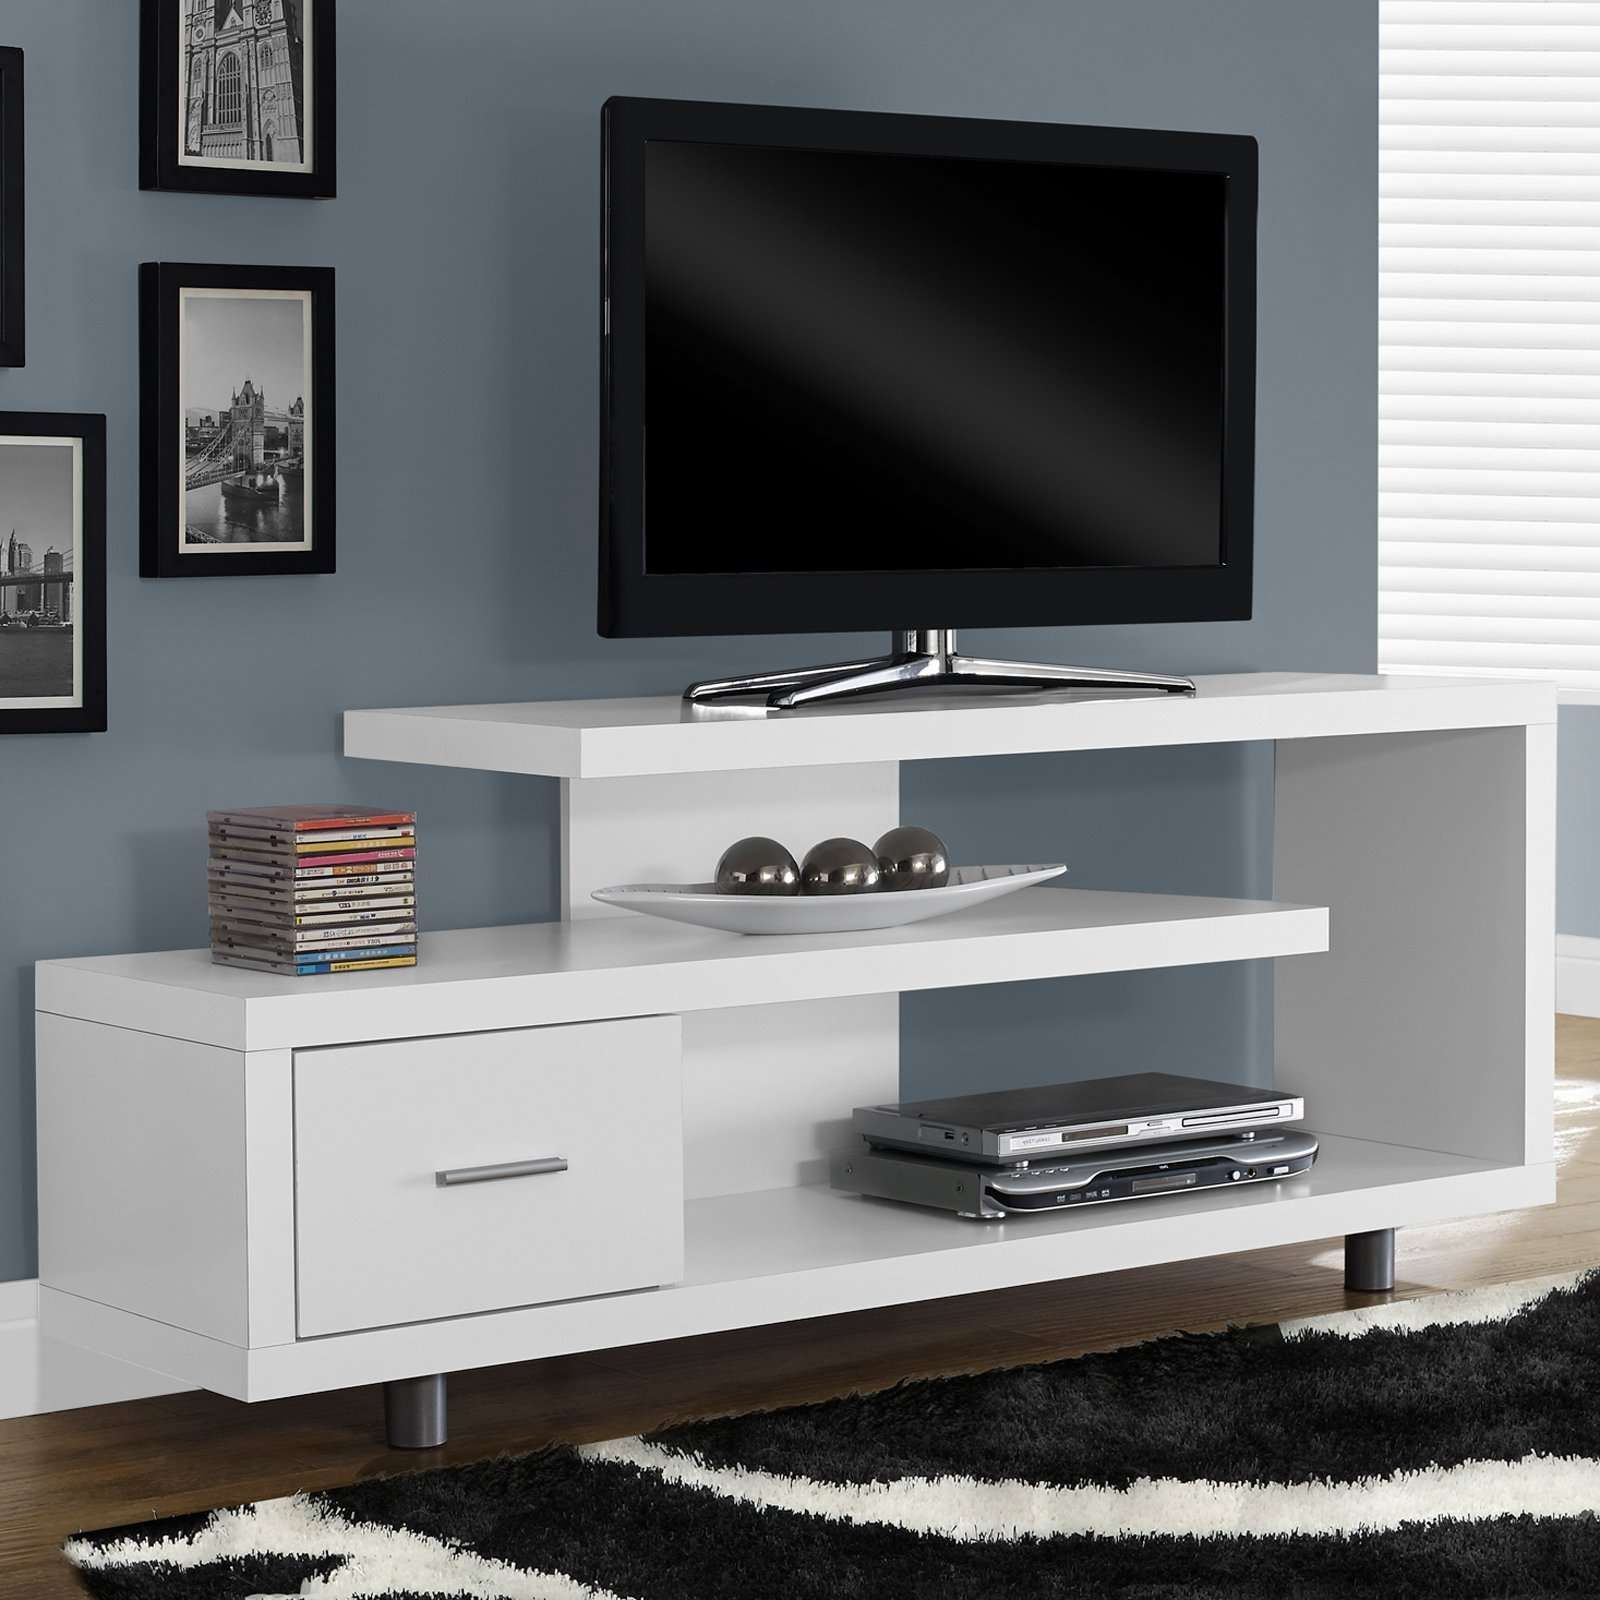 Tvilum Hayward Collection 71 In. Tv Stand | Hayneedle Intended For Fancy Tv Stands (Gallery 1 of 15)